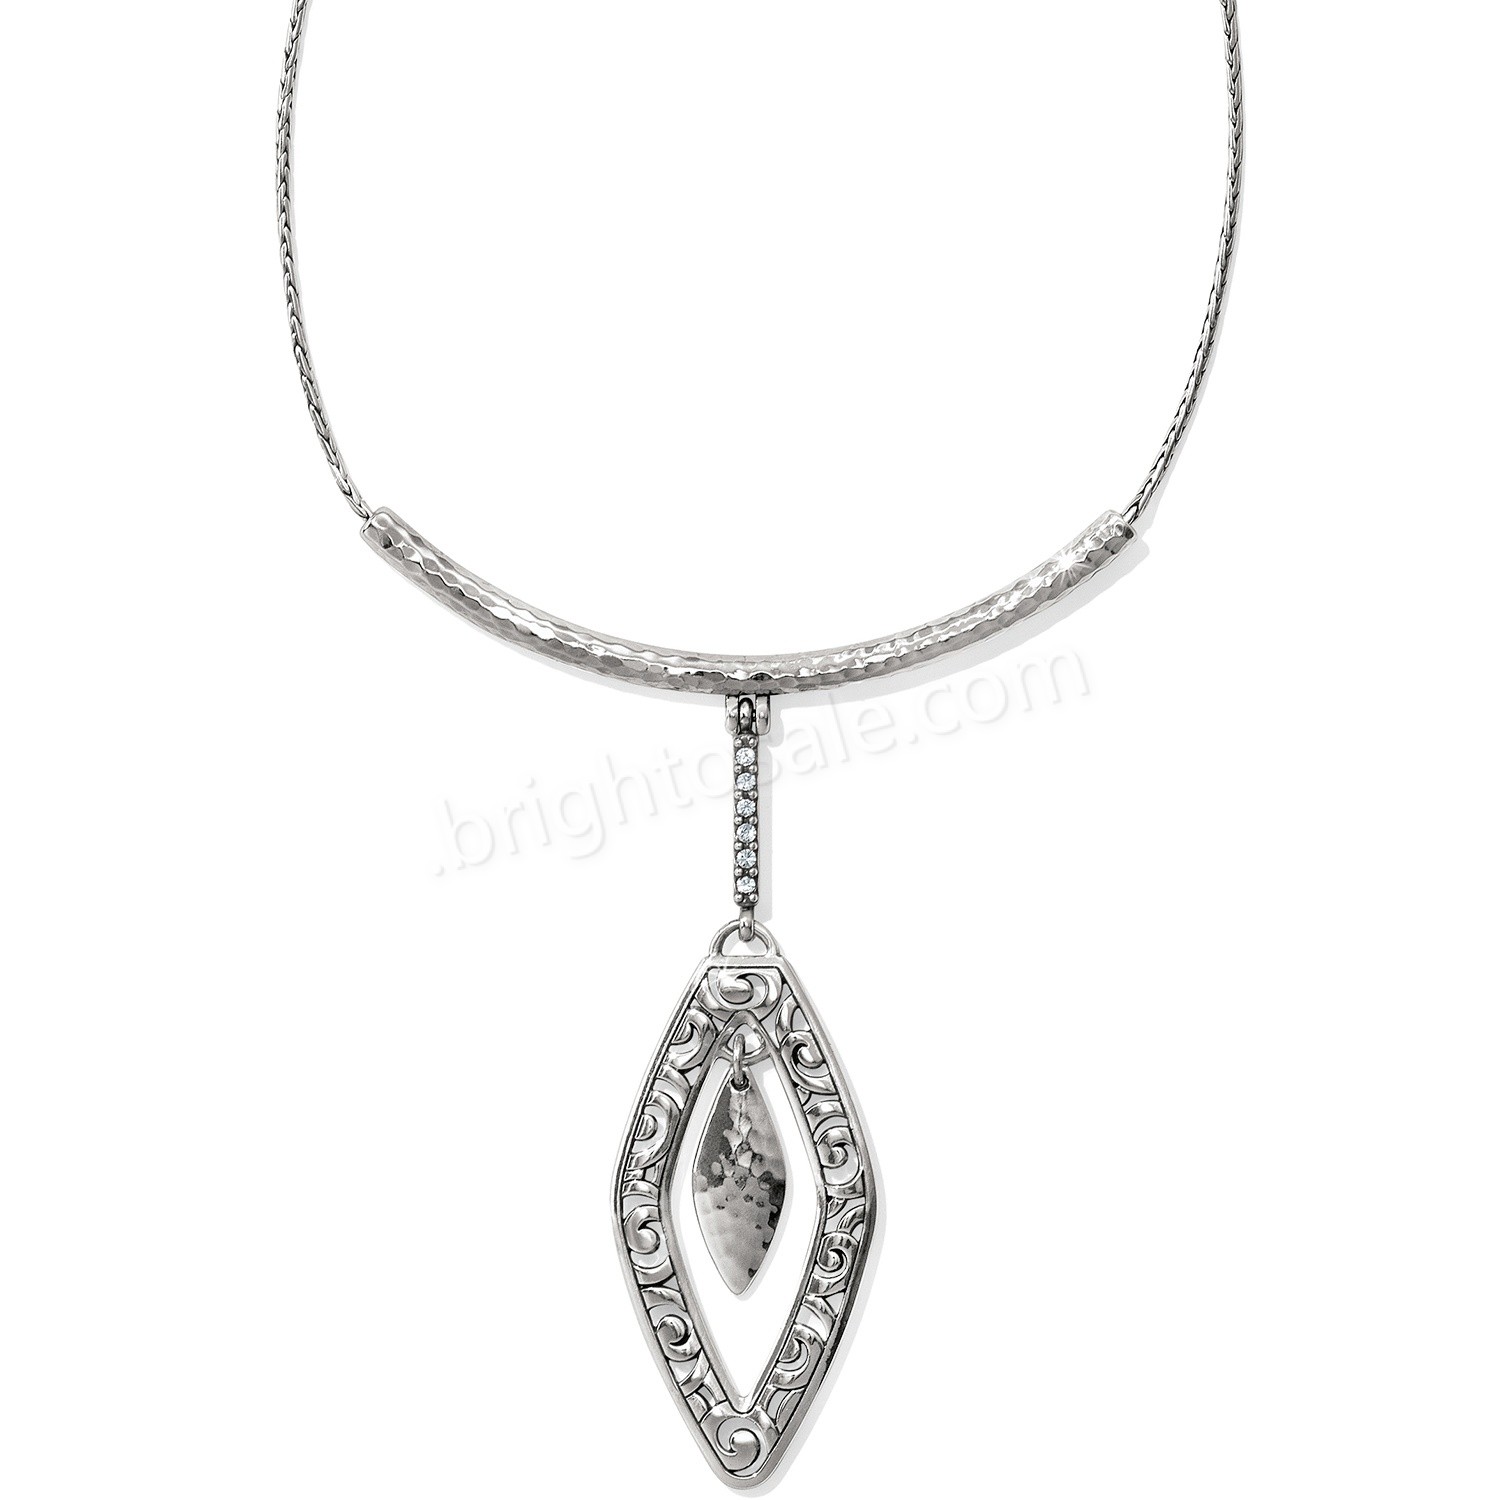 Brighton Collectibles & Online Discount Embrace Long Necklace - Brighton Collectibles & Online Discount Embrace Long Necklace